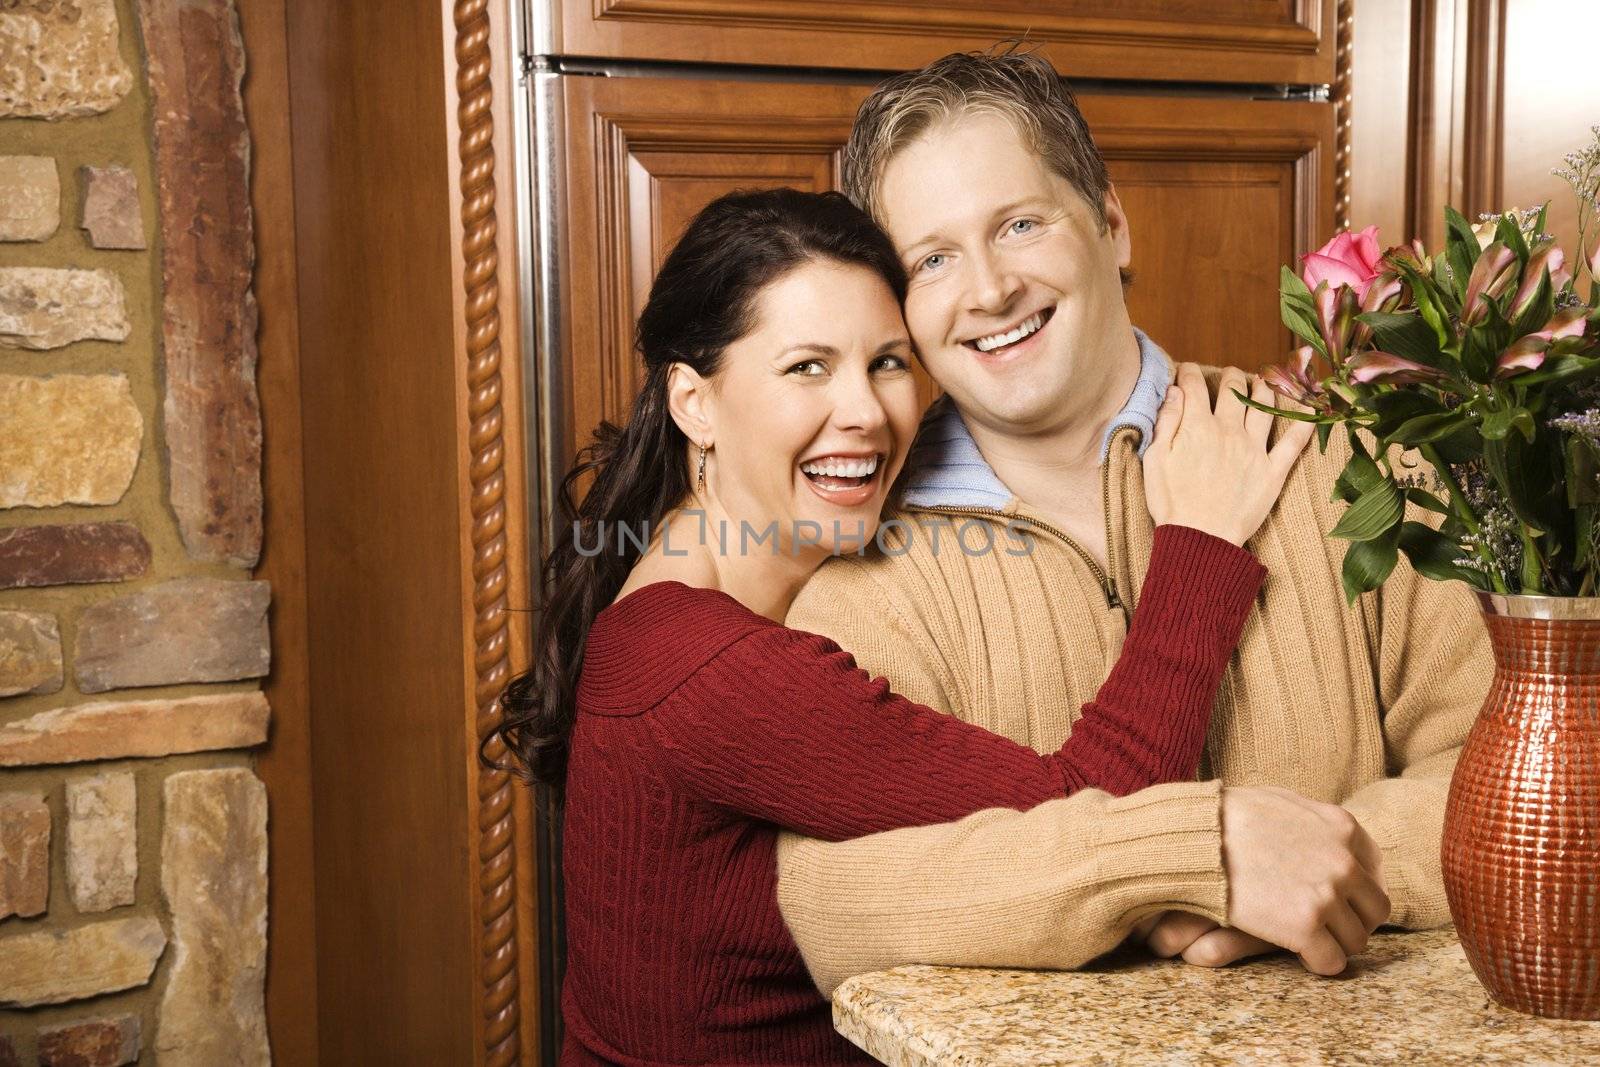 Caucasian woman with arms around Caucasian man in kitchen smiling and looking at viewer.